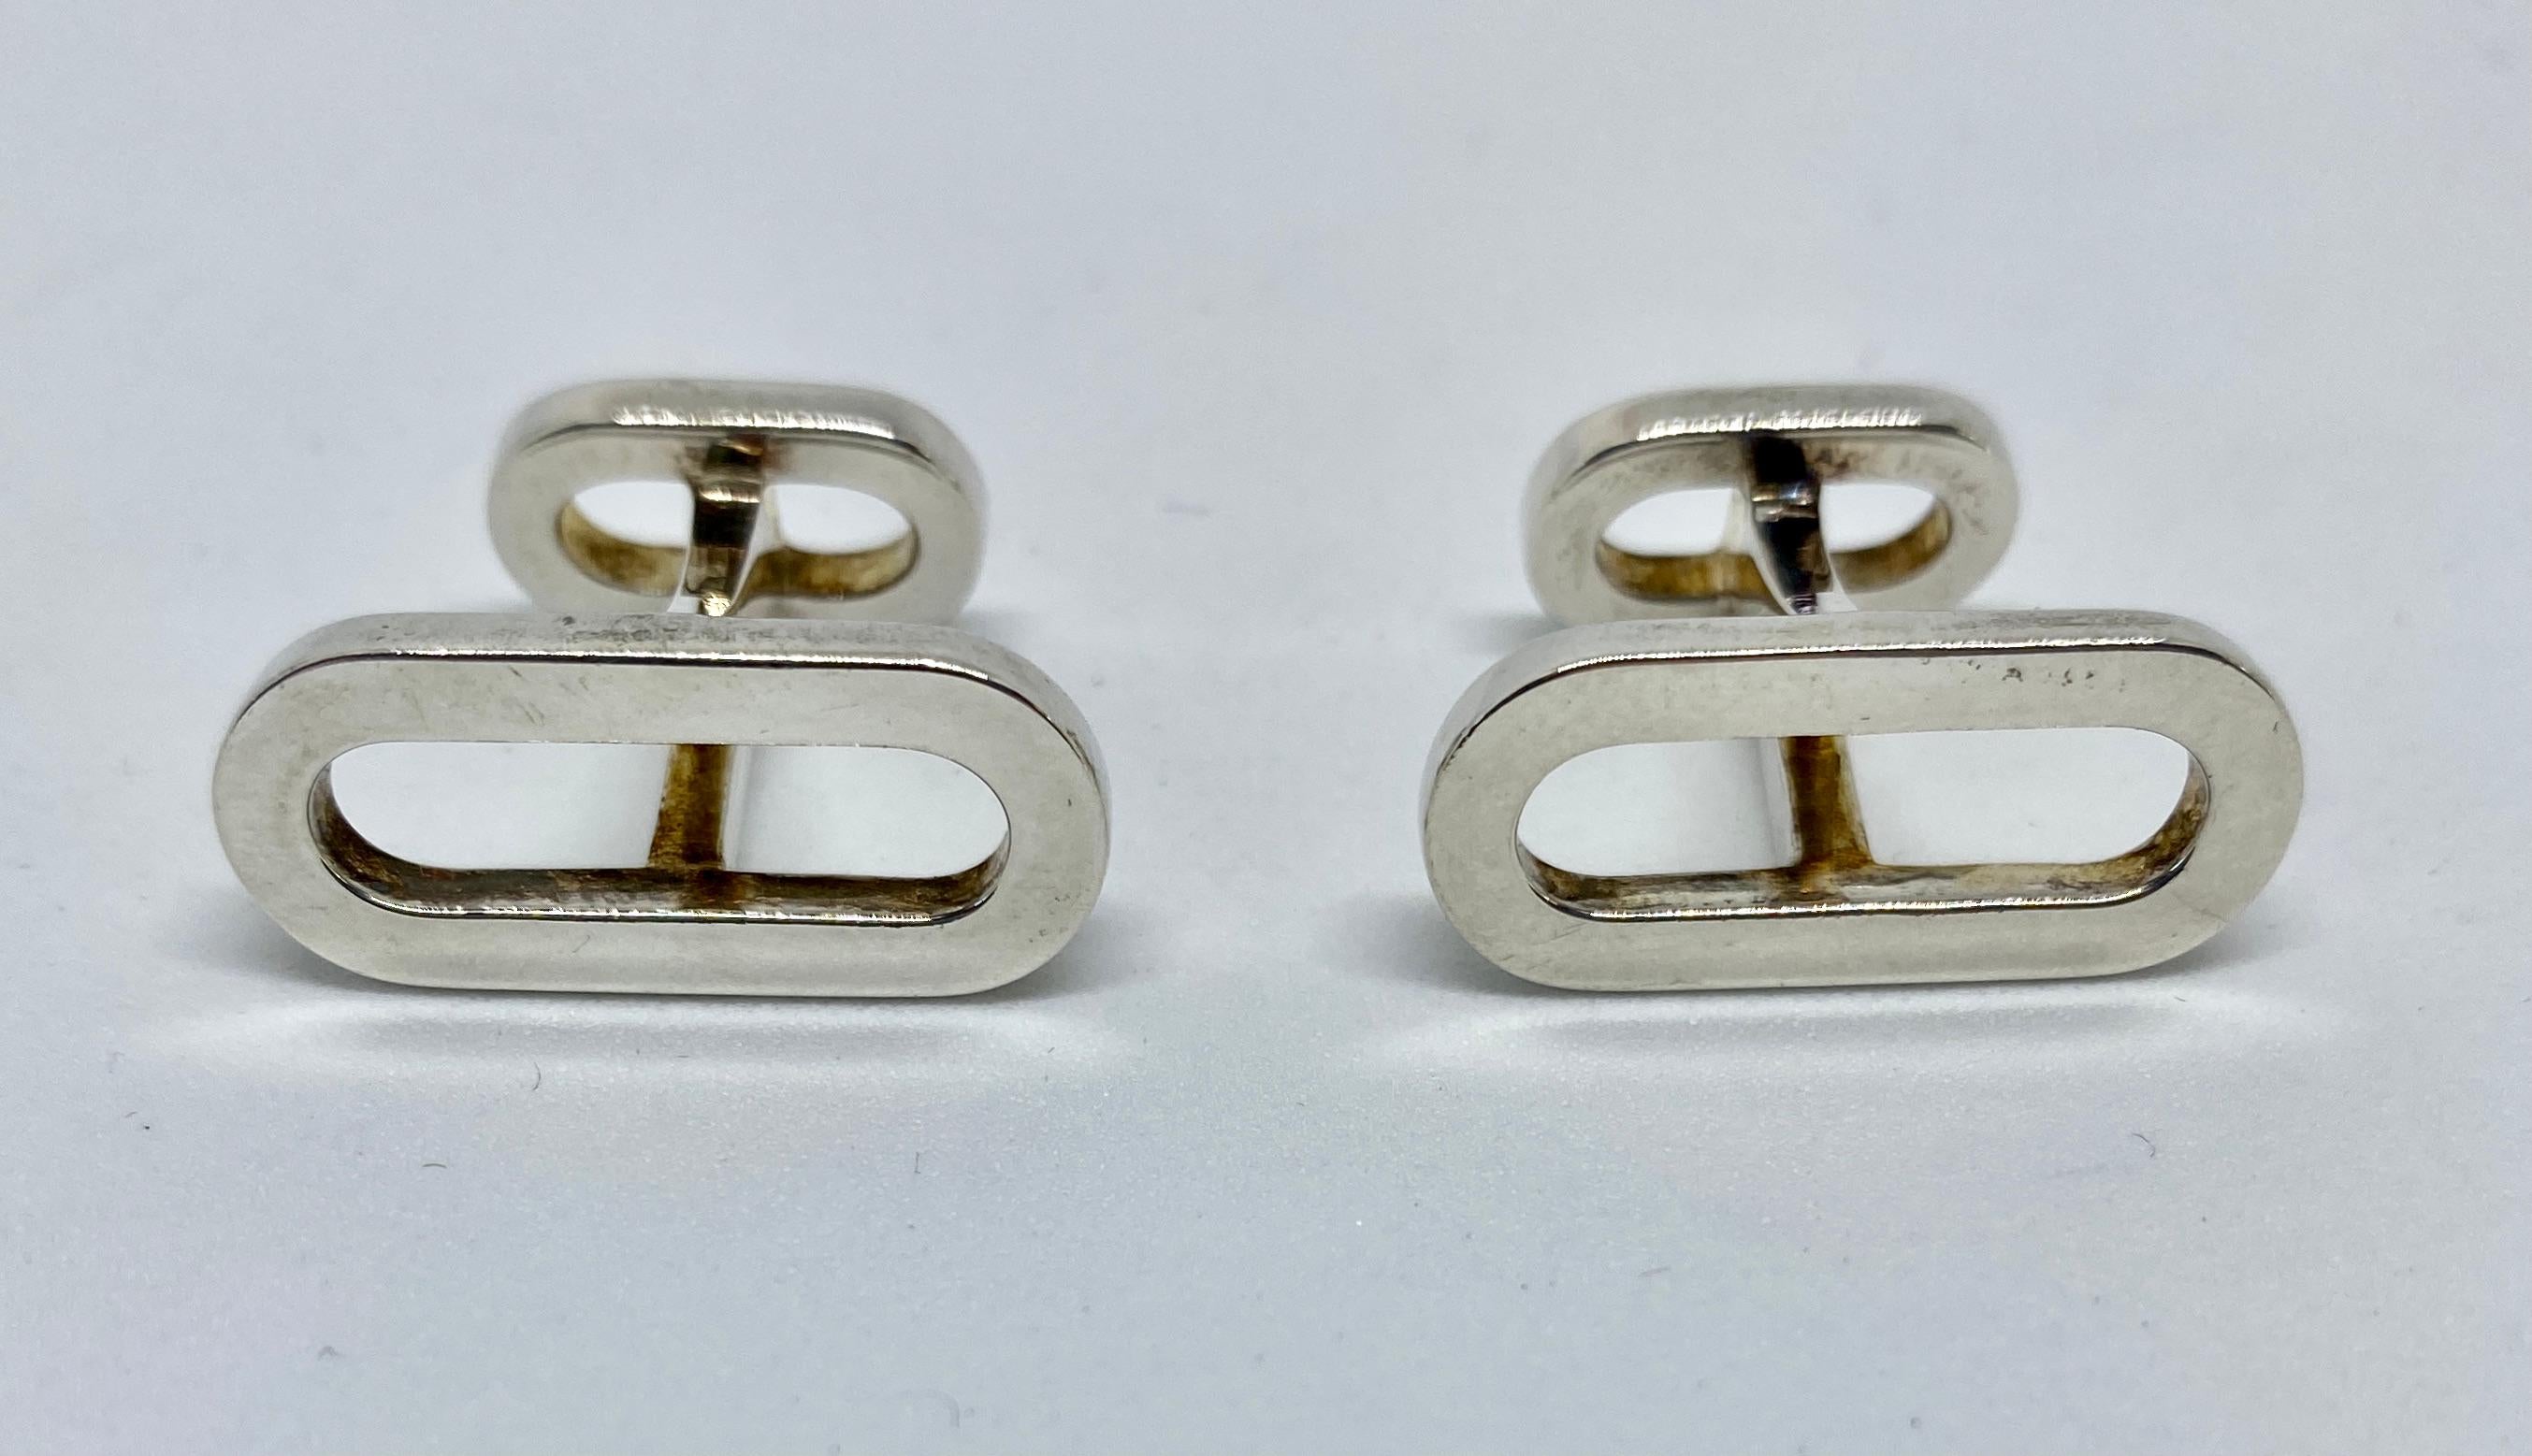 Classic cufflinks from the 